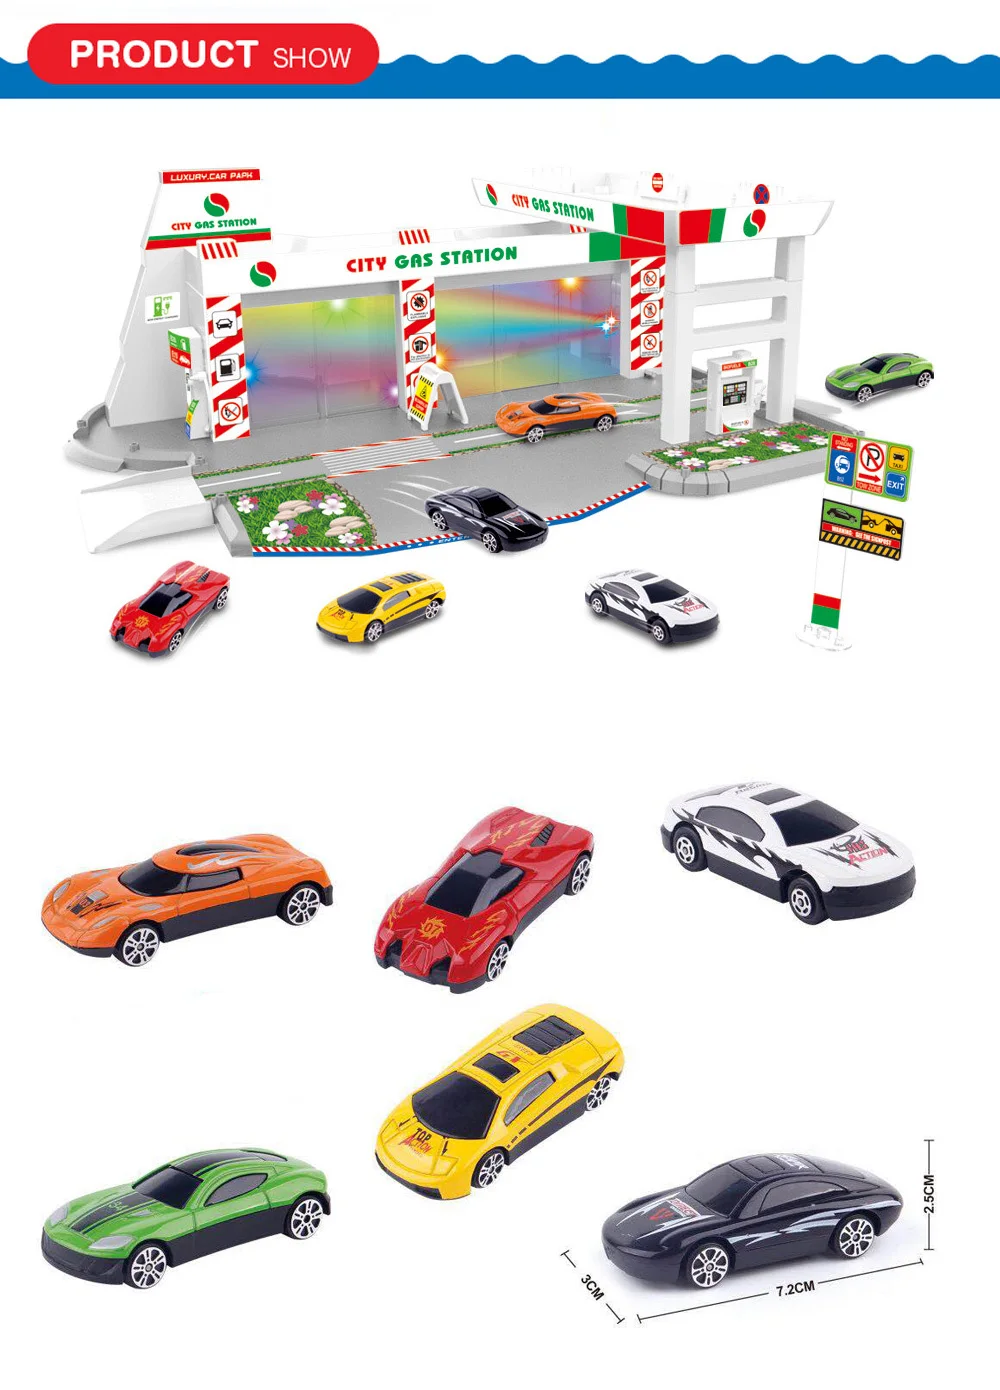 6 Level Car Park Garage Petrol Station Include 5 Vehicles Play Set Gift For Kids 